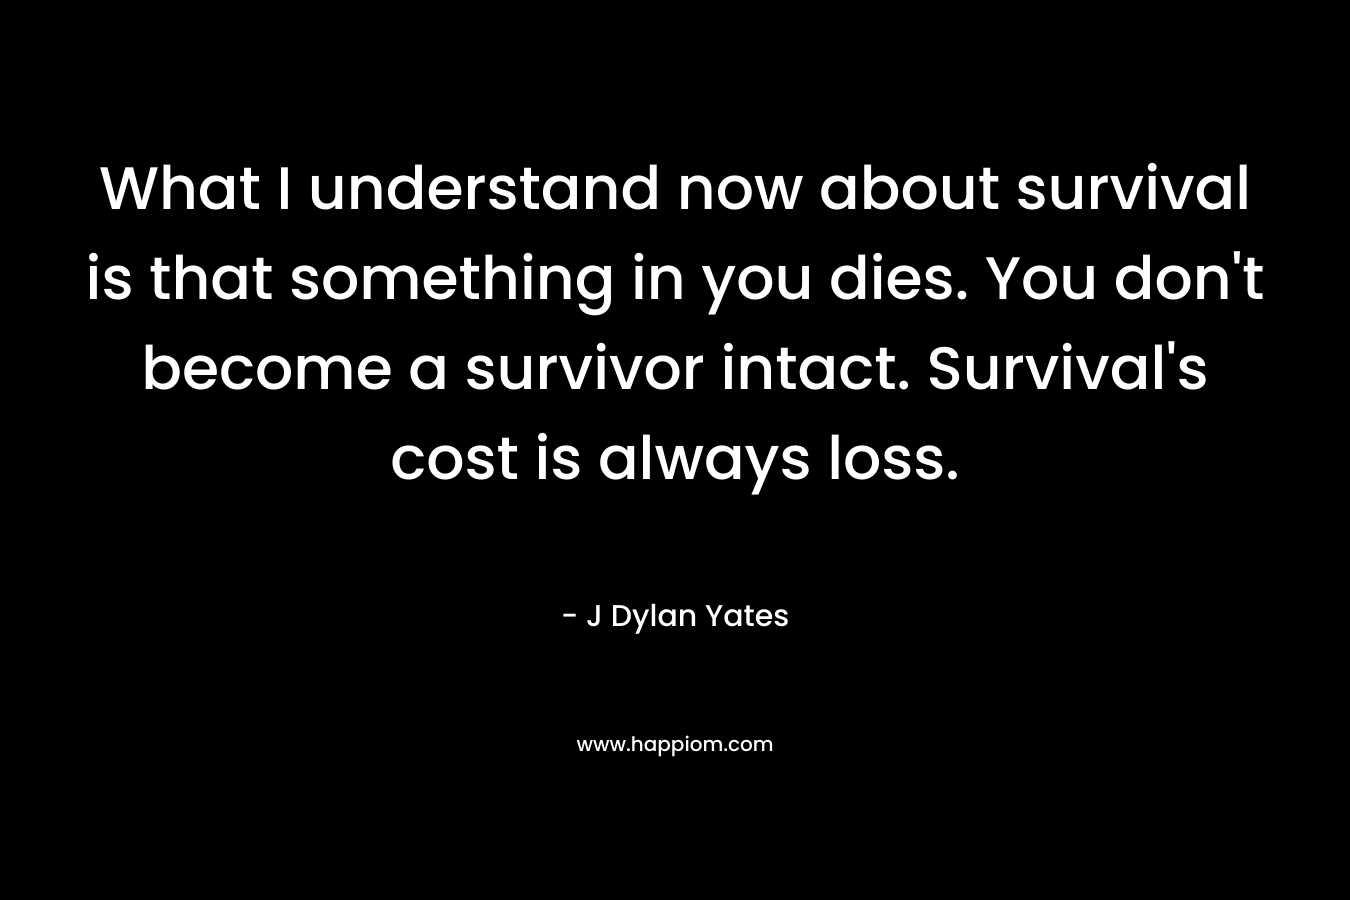 What I understand now about survival is that something in you dies. You don't become a survivor intact. Survival's cost is always loss.